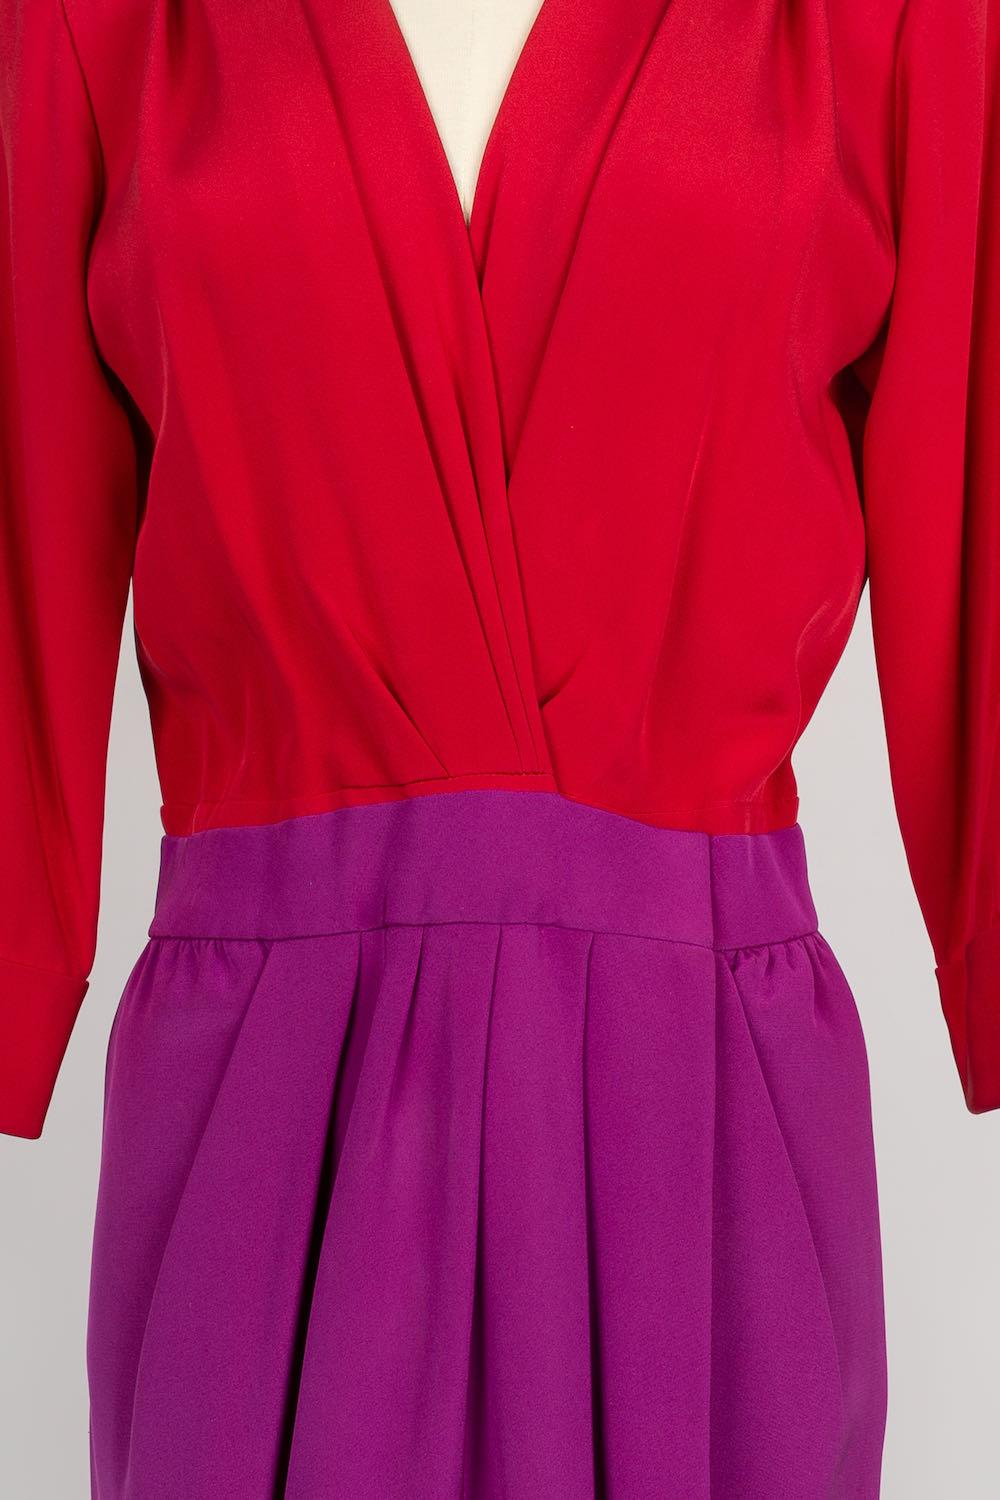 Yves Saint Laurent Purple and Red Silk Haute Couture Dress with Blue Silk Belt 2